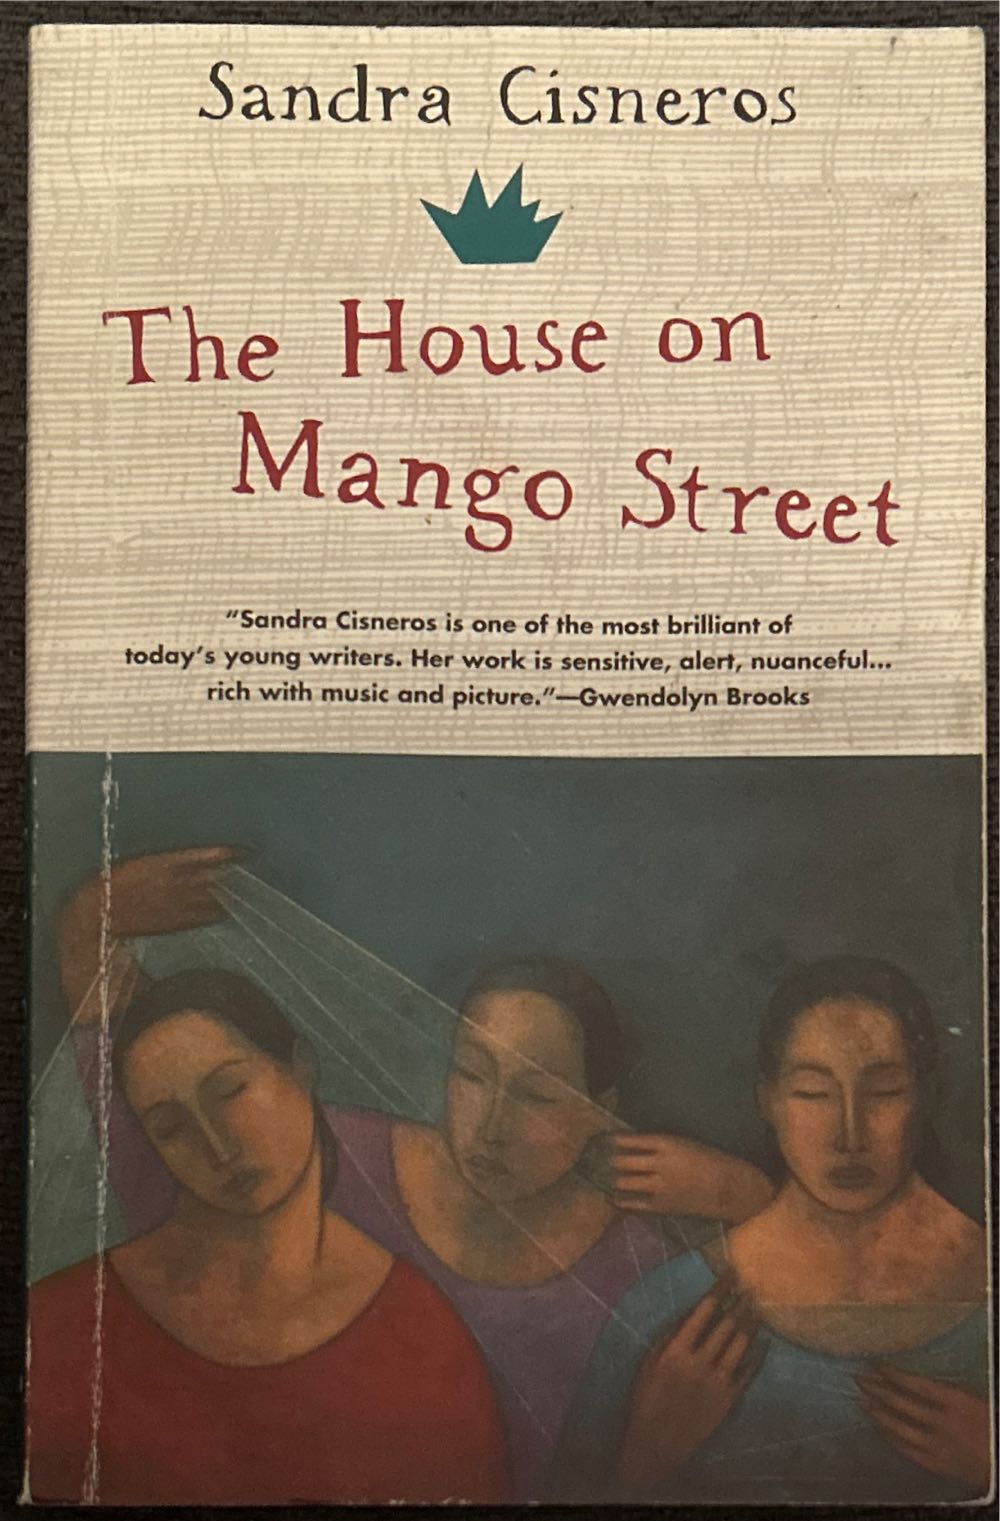 The House On Mango Street - Sandra Cisneros (Vintage - Paperback) book collectible [Barcode 9780679734772] - Main Image 3